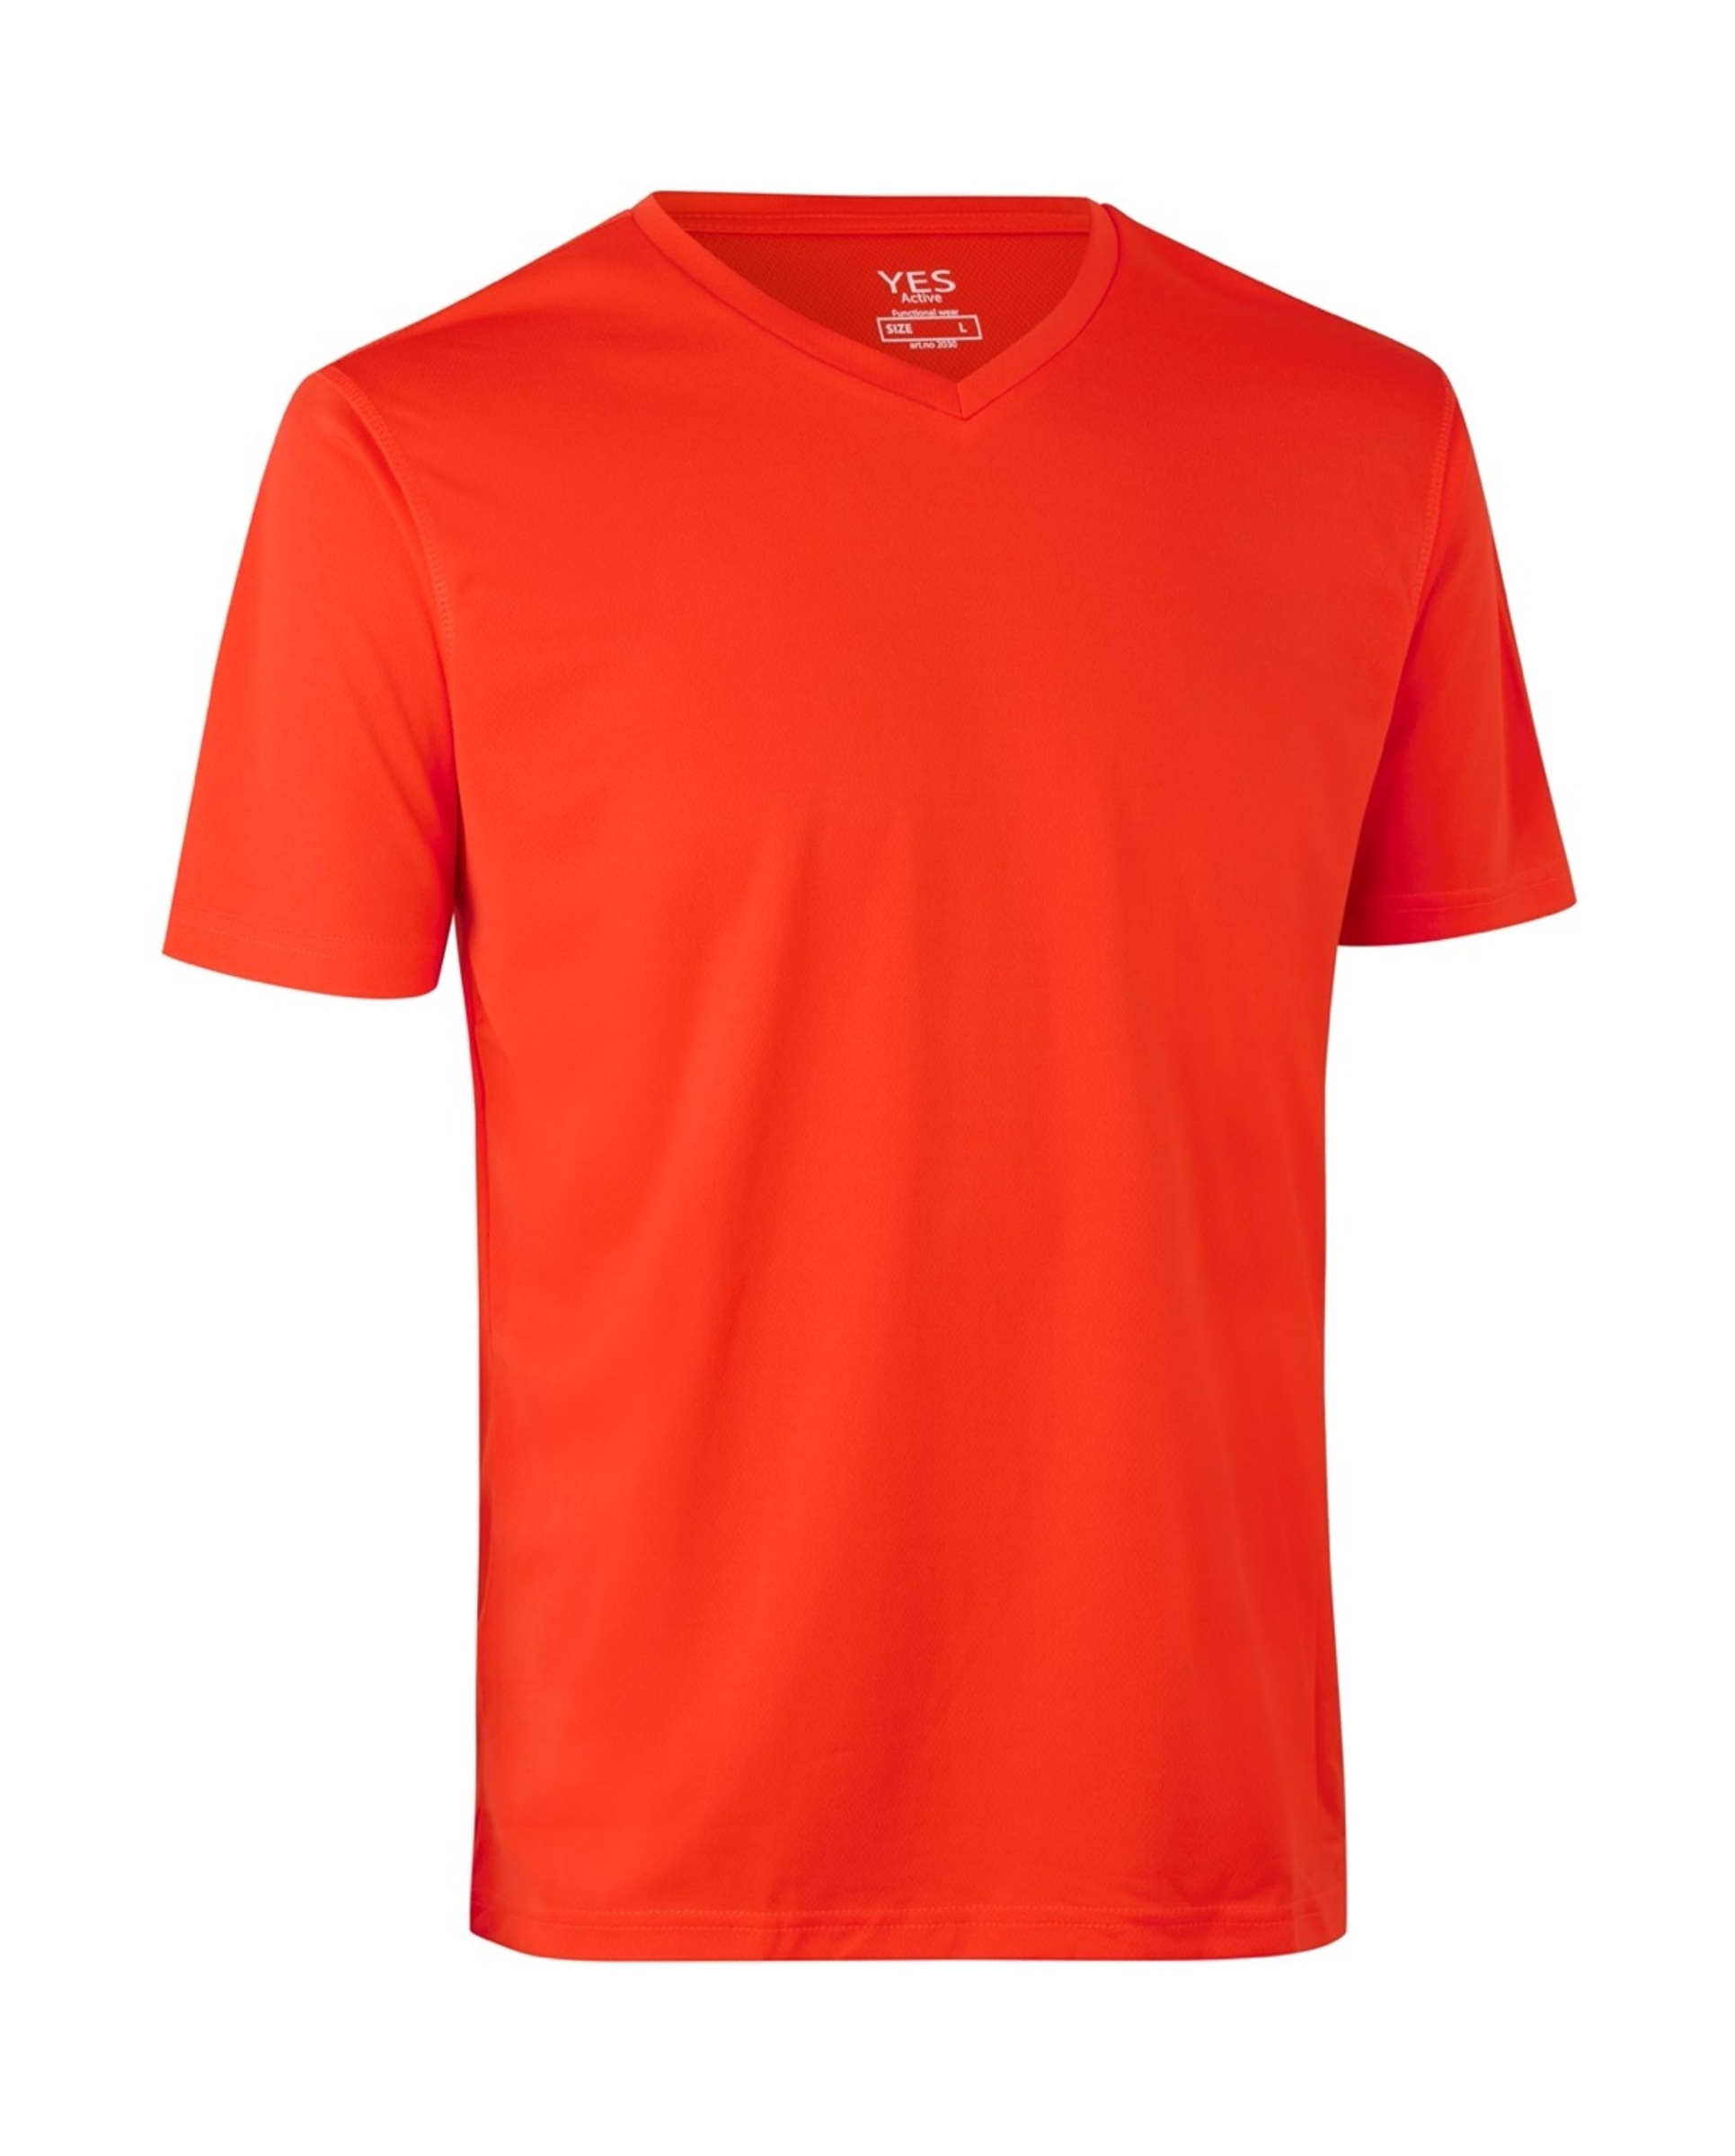 Idwear YES Active T-shirt